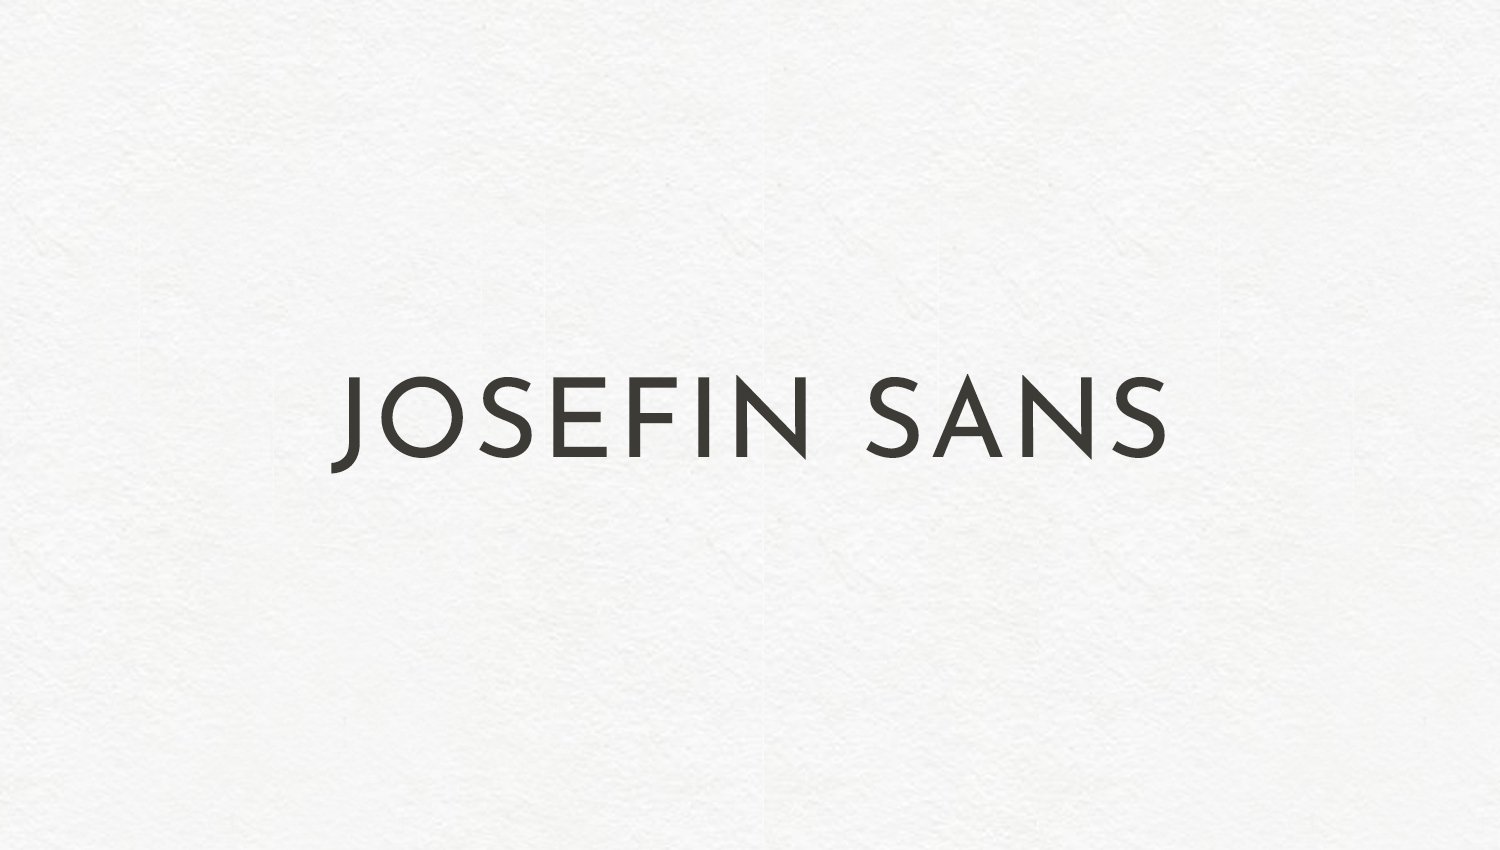 10 Best Fonts For Logos: Top Recommended Fonts For a Clean and Minimalistic  Logo Design